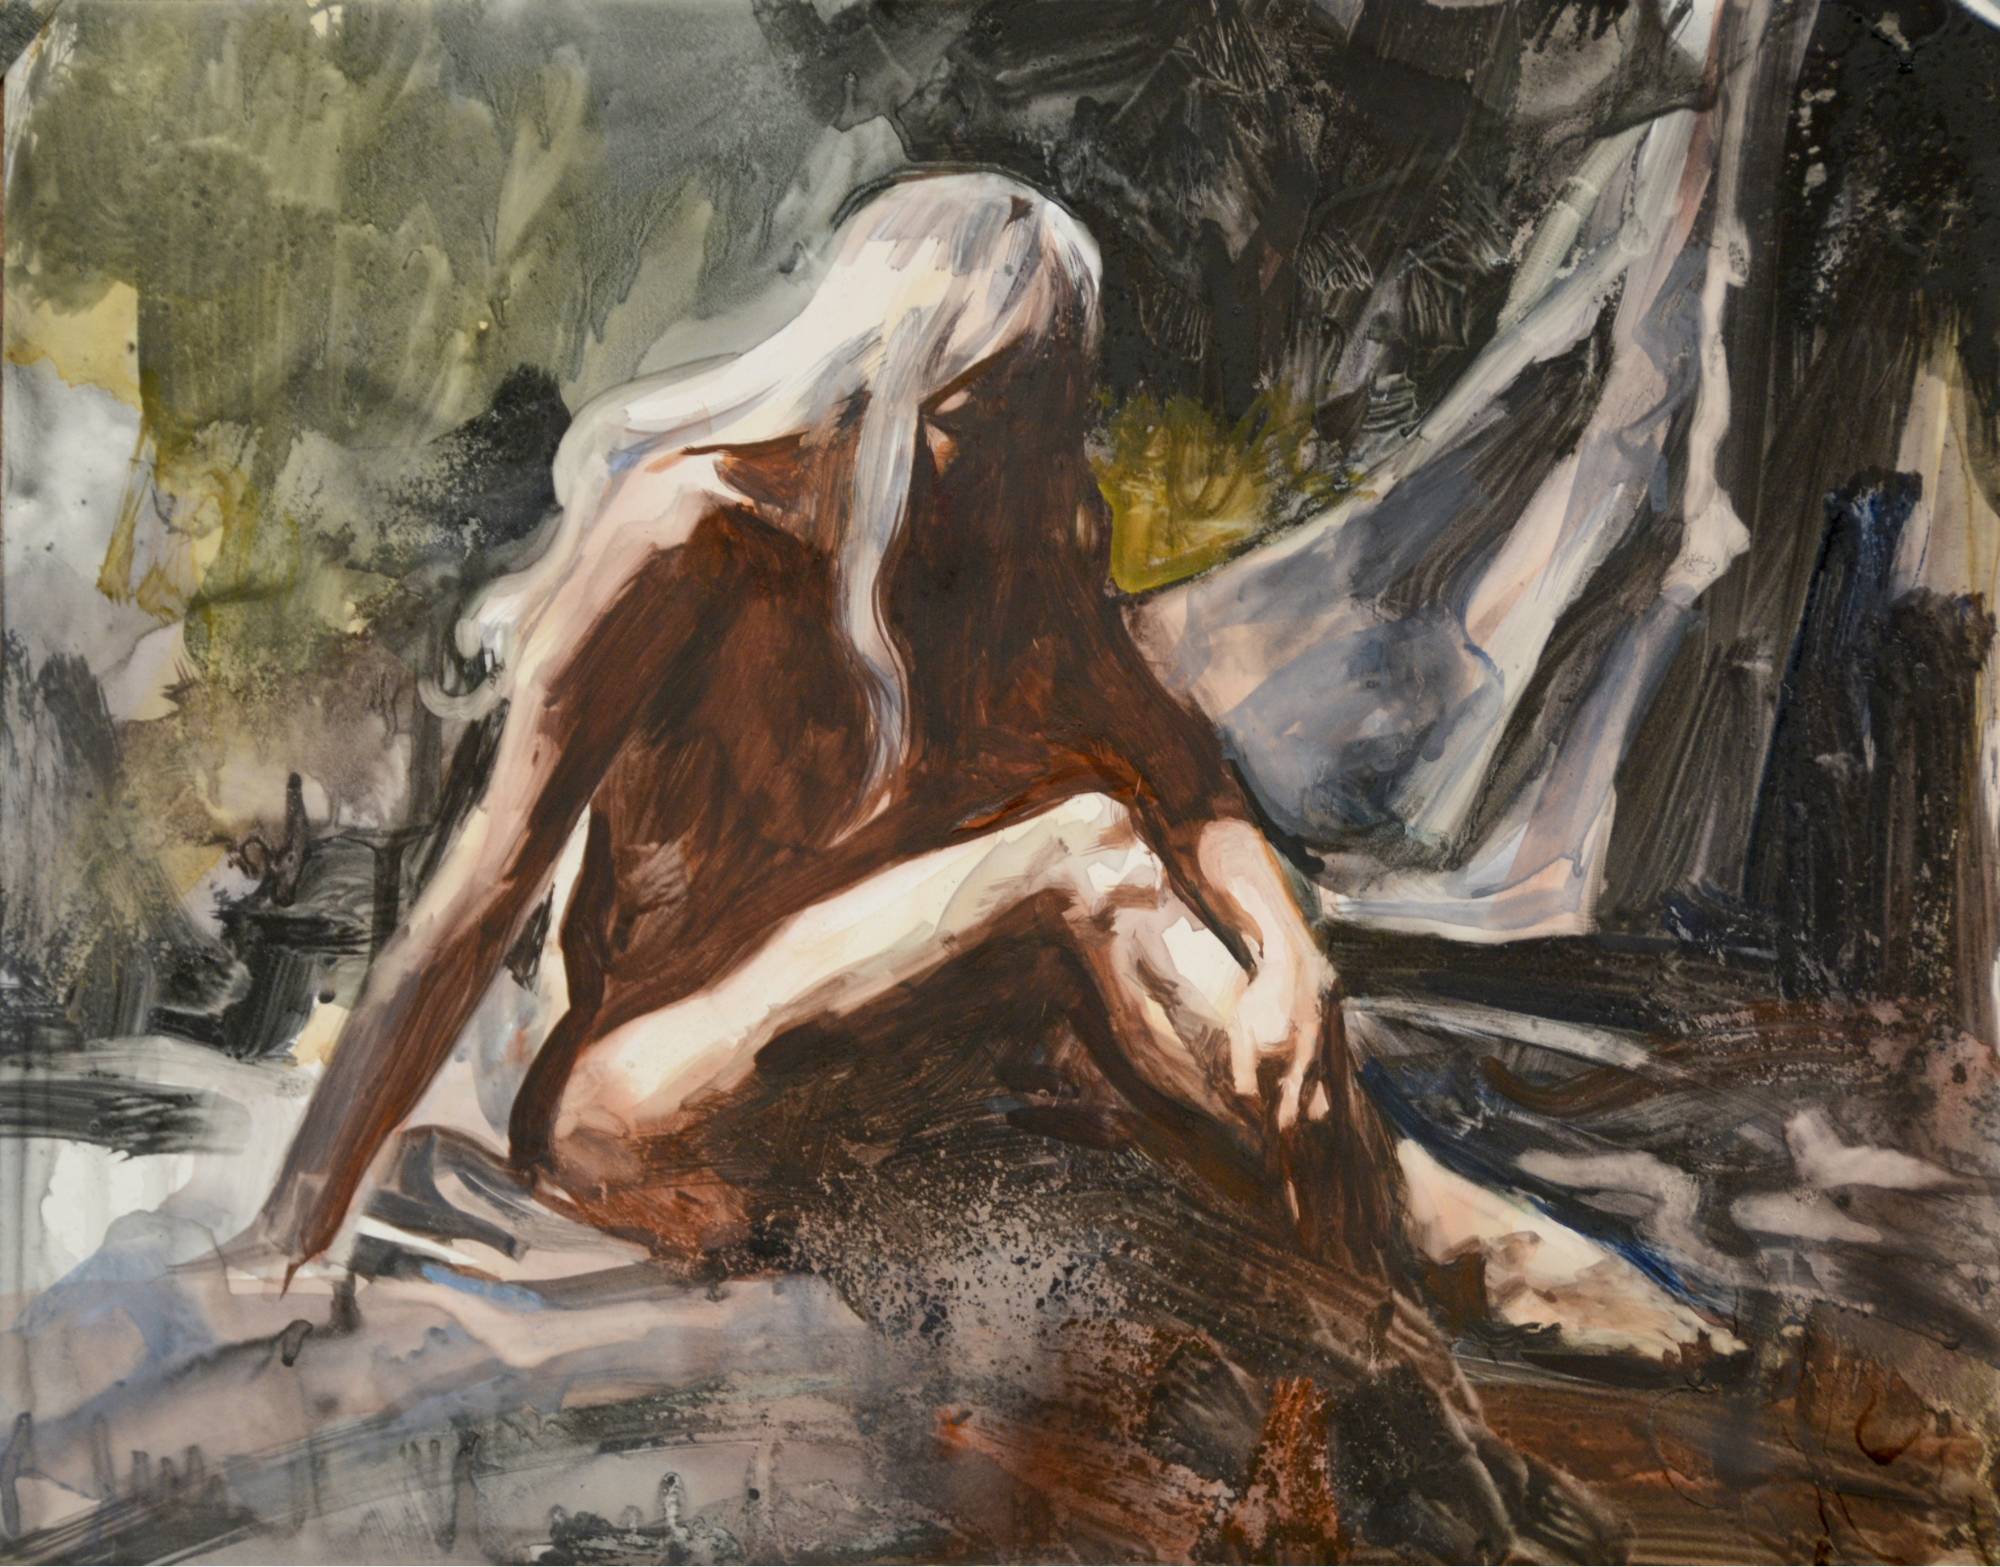 watercolor of a figure facing away from the light source